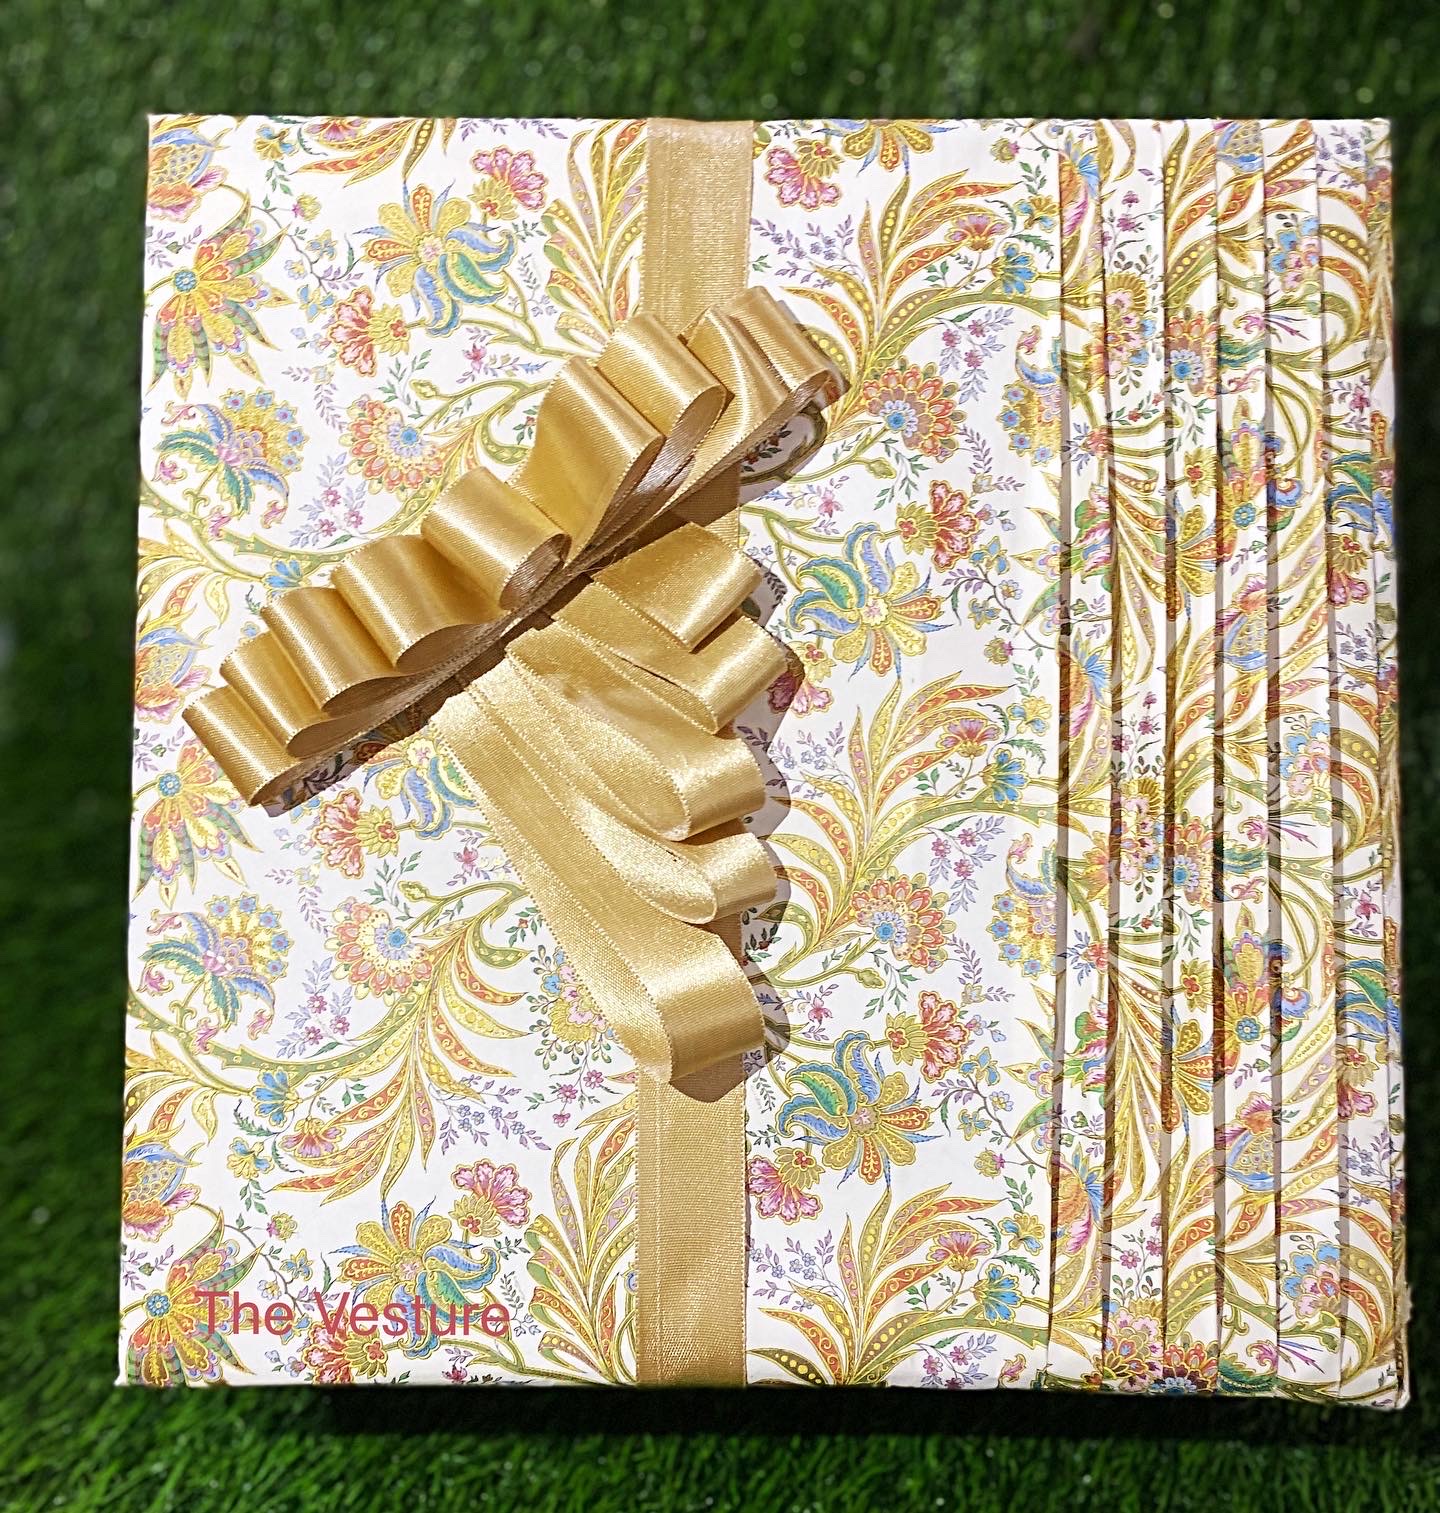 Gift wrapping guide: How to kimono wrap a gift